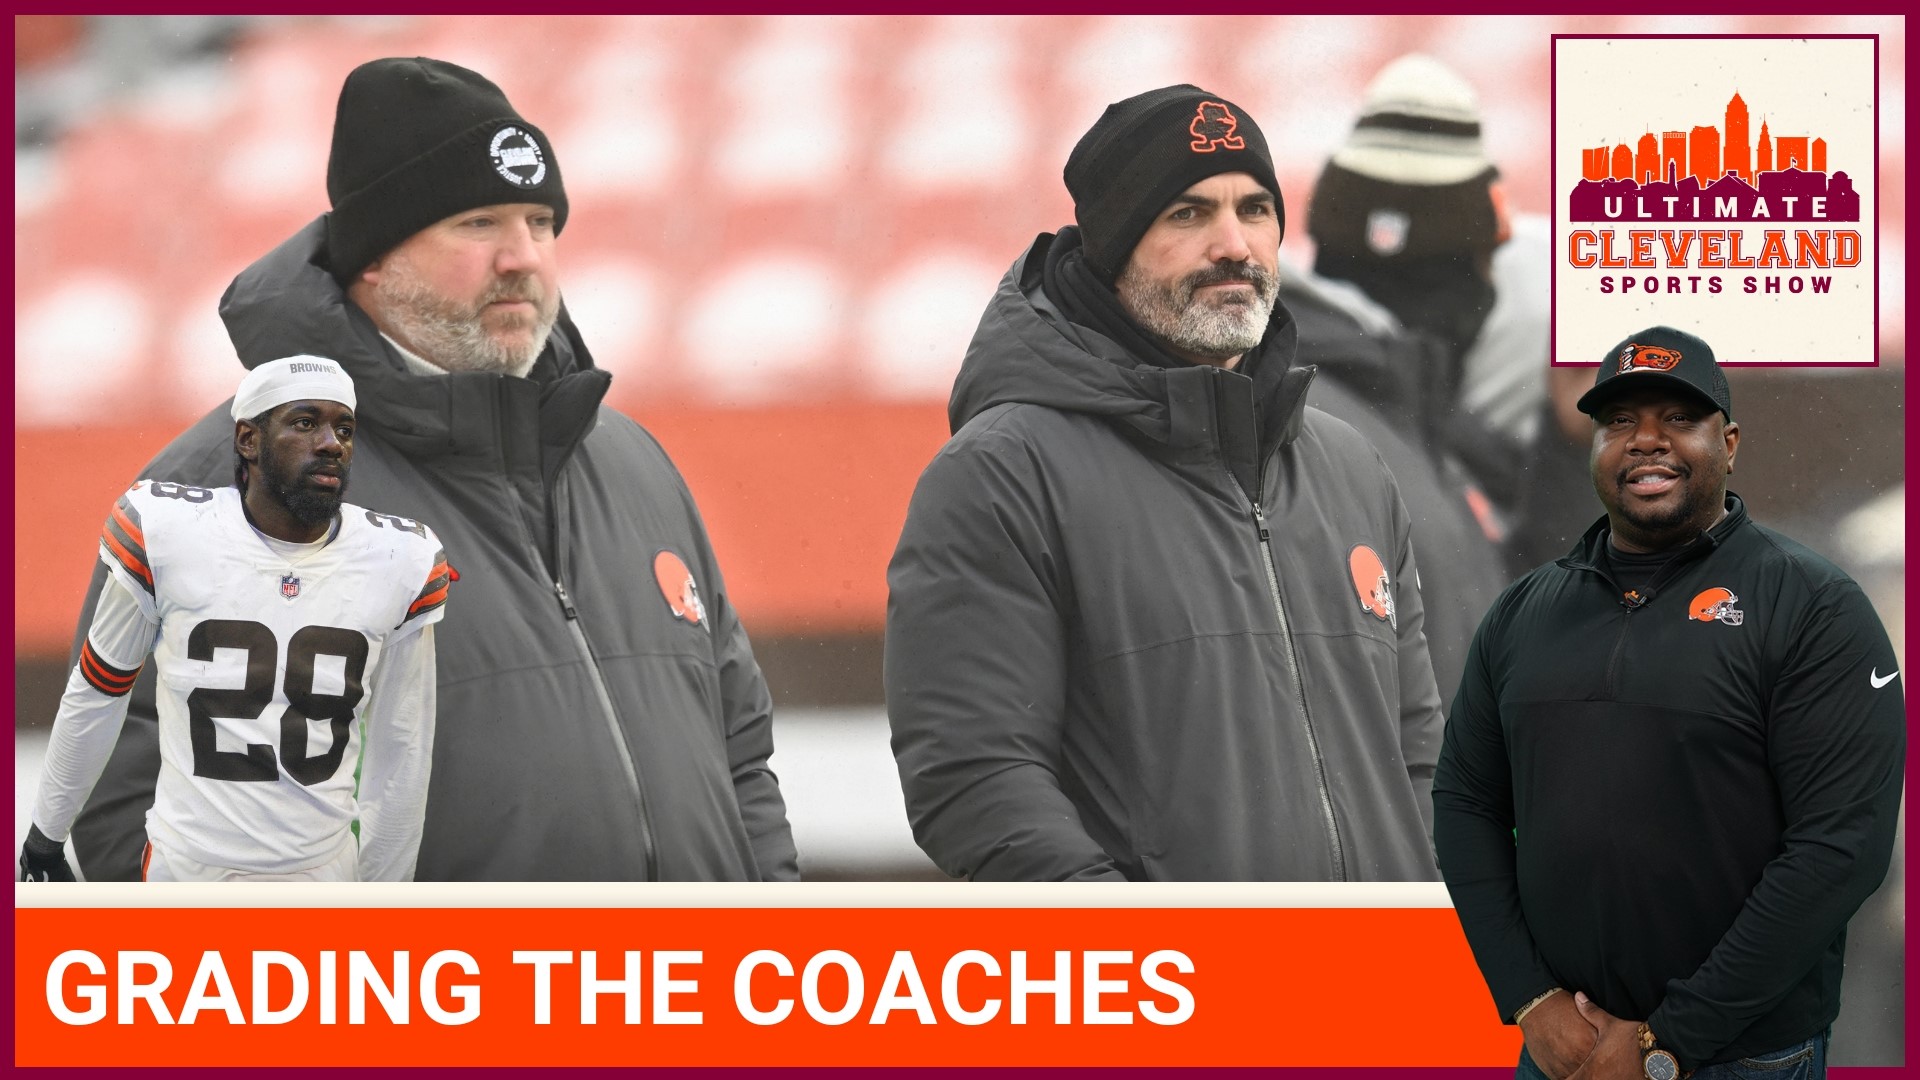 We're breaking out our report cards again to grade Kevin Stefanski & the rest of the Browns' staff on their performance in 2022.